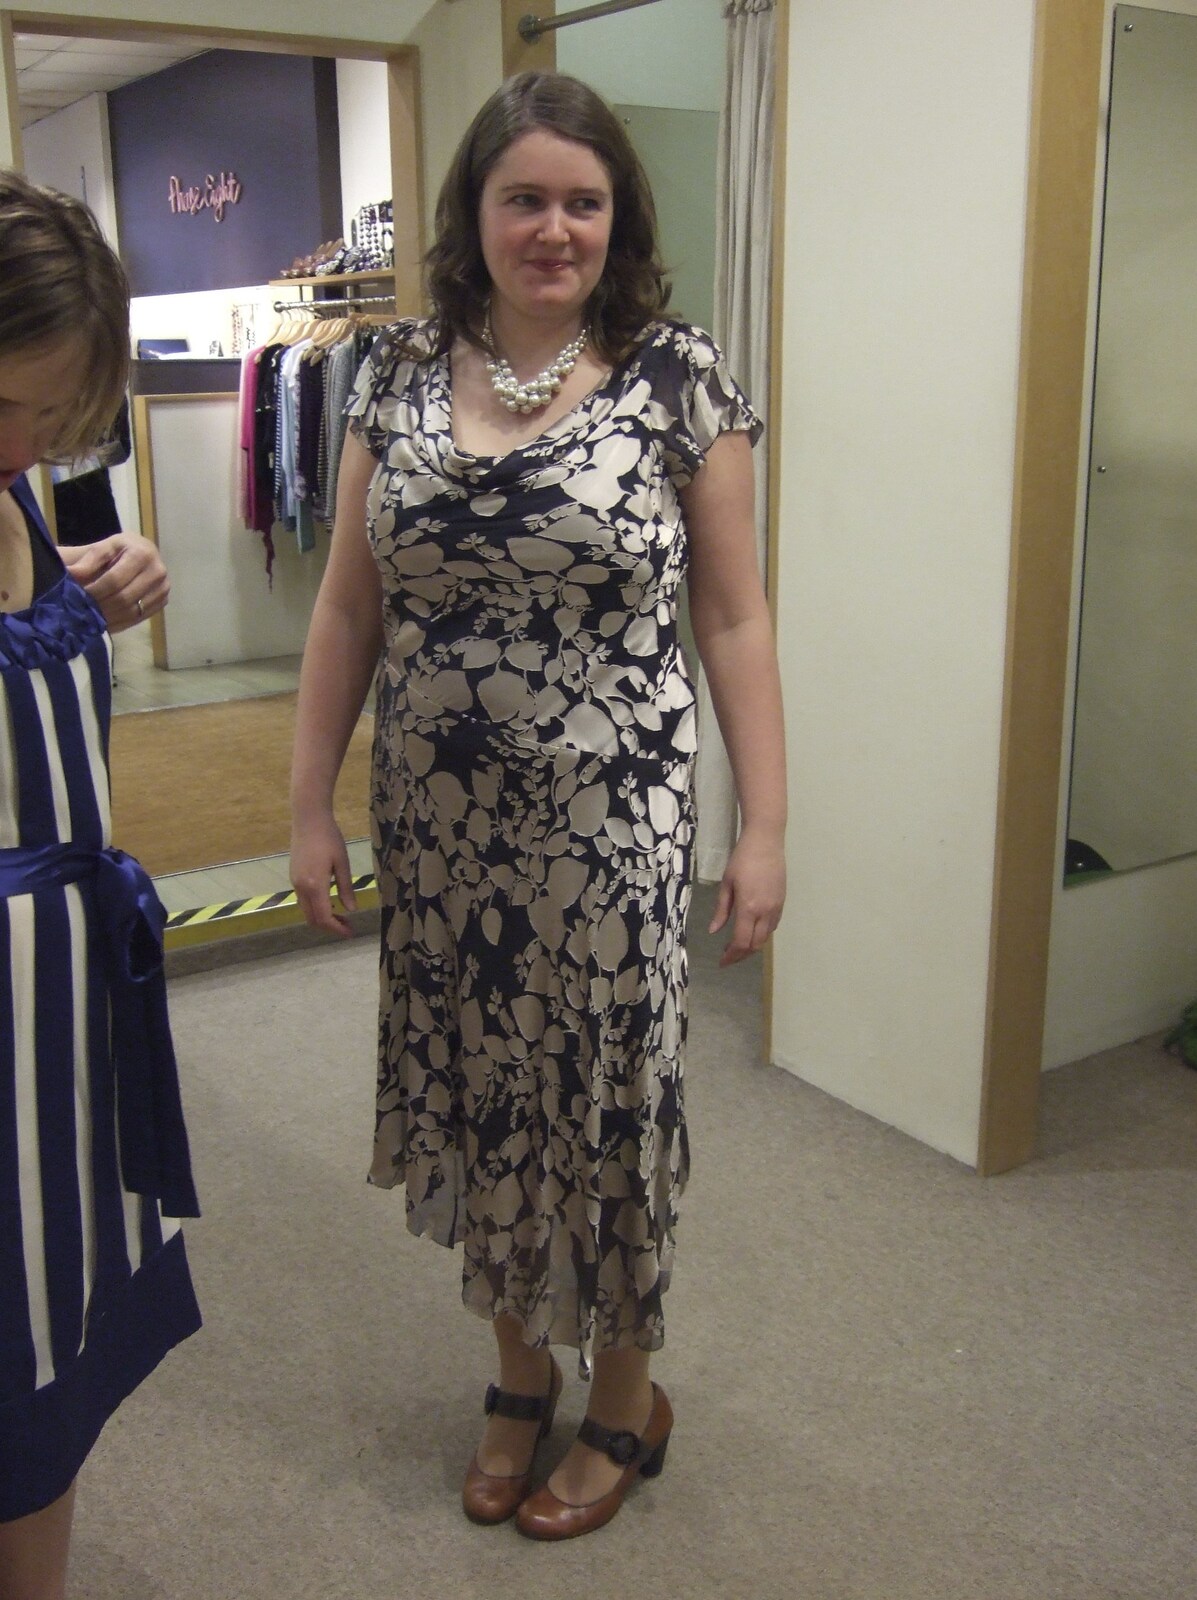 Another dress from Fred in Monkstown, County Dublin, Ireland - 2nd February 2010